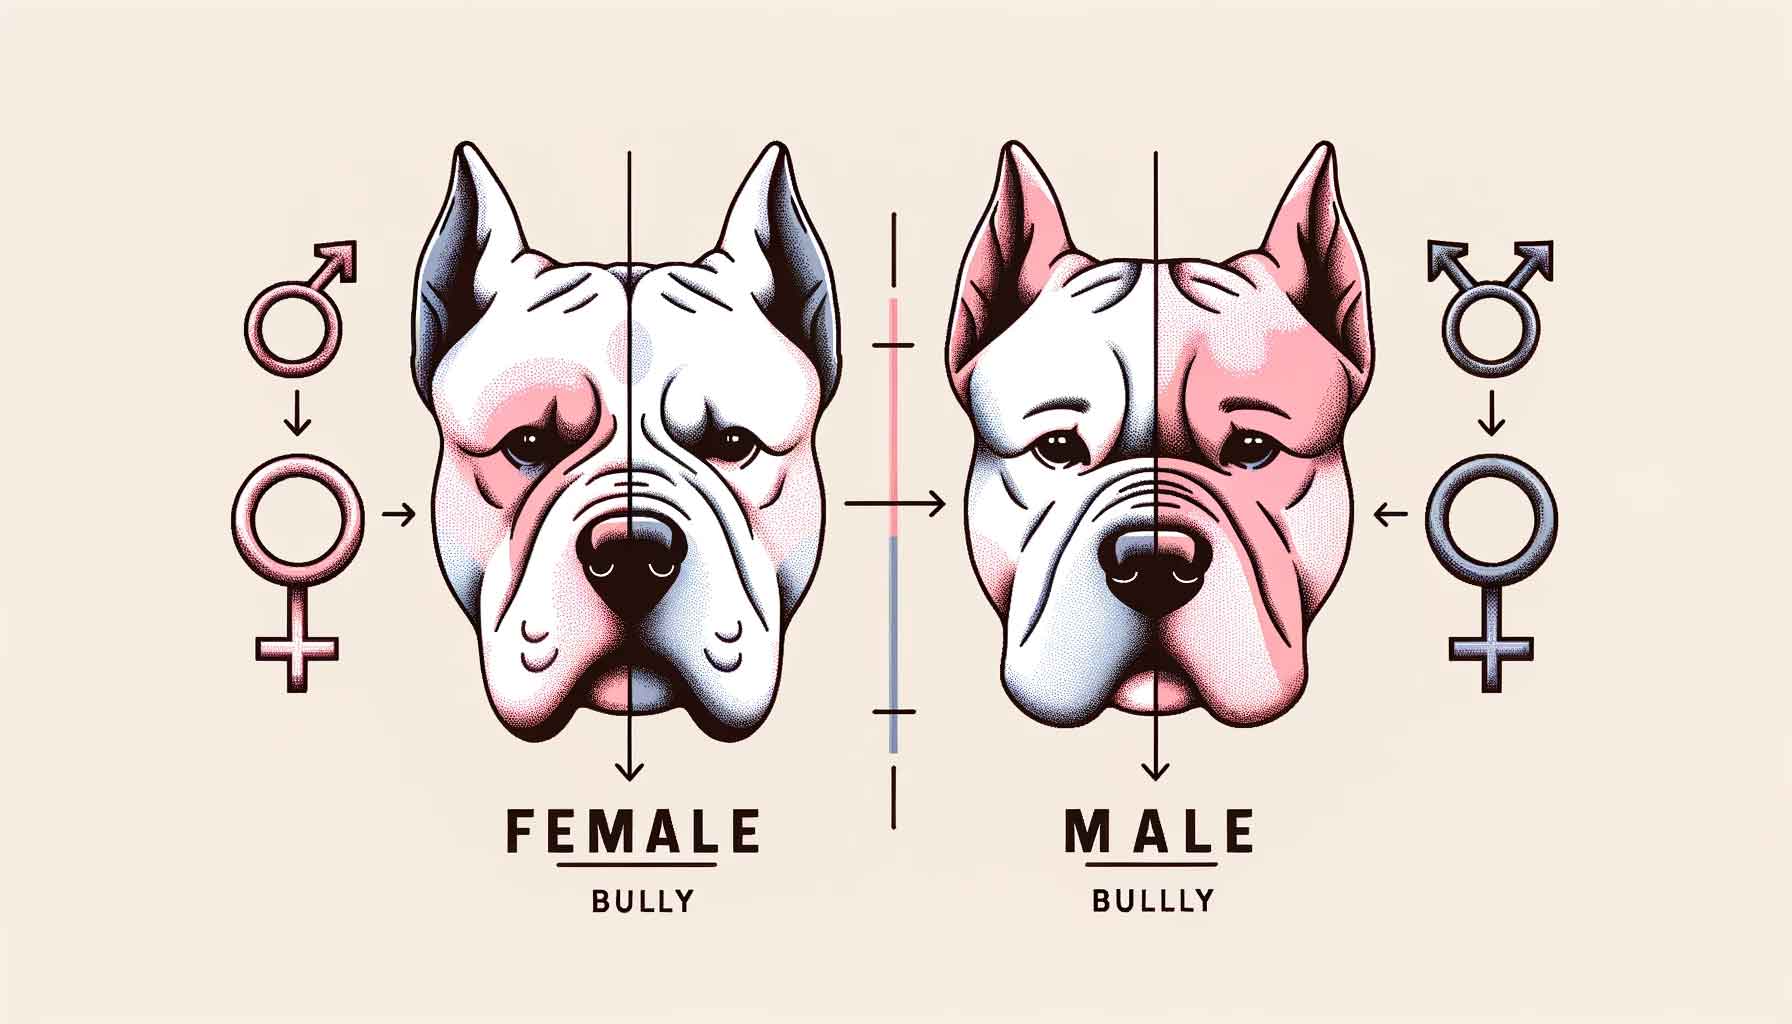 Illustration of a male micro bully on the left and a female micro bully on the right, standing side by side against a gradient background, showcasing their distinct physical characteristics. A title banner at the top reads 'Male vs. Female Micro Bully Differences